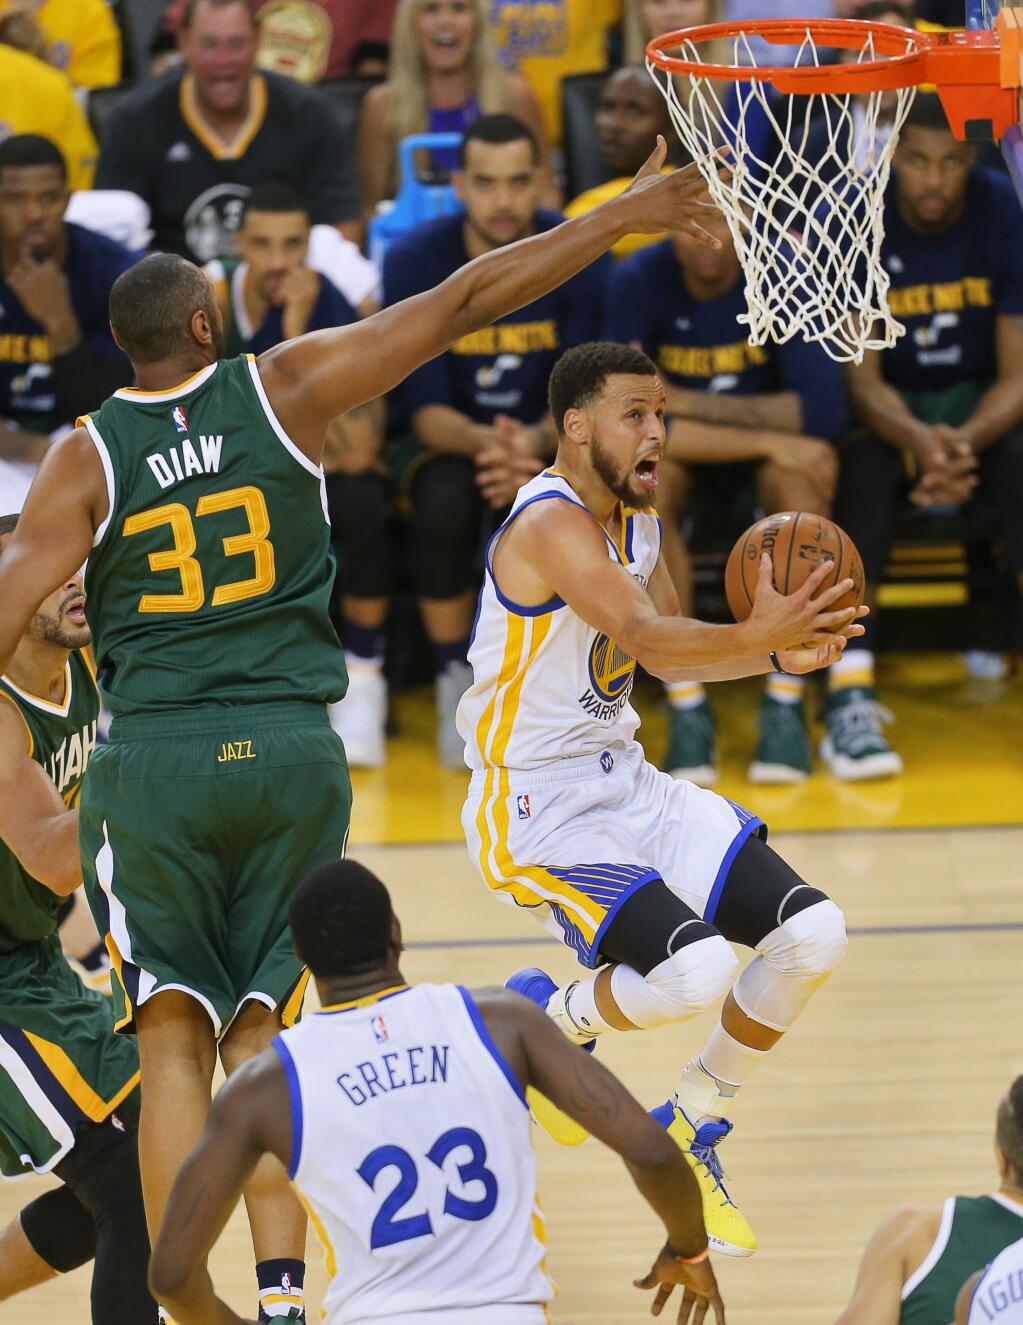 Golden State Warriors guard Stephen Curry scoops the ball up and in against Utah Jazz center Boris Diaw, during Game 1 of the of NBA Western Conference Semifinals in Oakland on Tuesday, May 2, 2017. (Christopher Chung/ The Press Democrat)